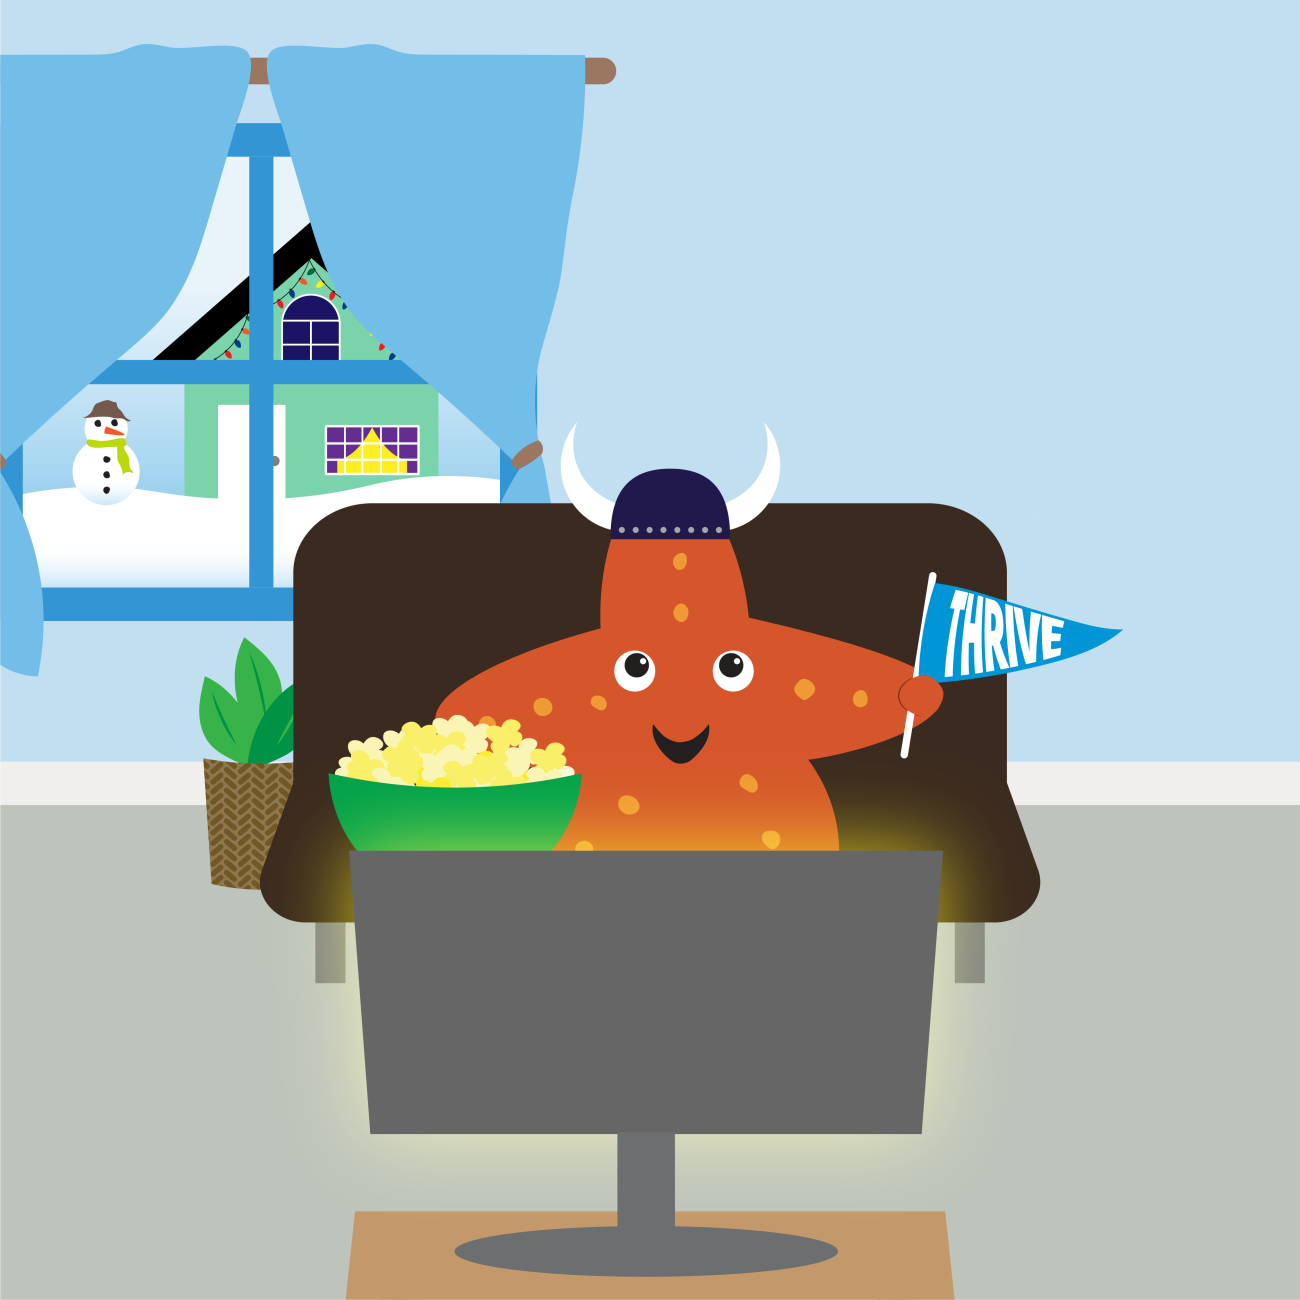 An orange starfish holding a green bowl of popcorn and a blue THRIVE pennant sitting on a brown couch in front of a blue wall and a window looking out on a snowy scene while watching a TV 